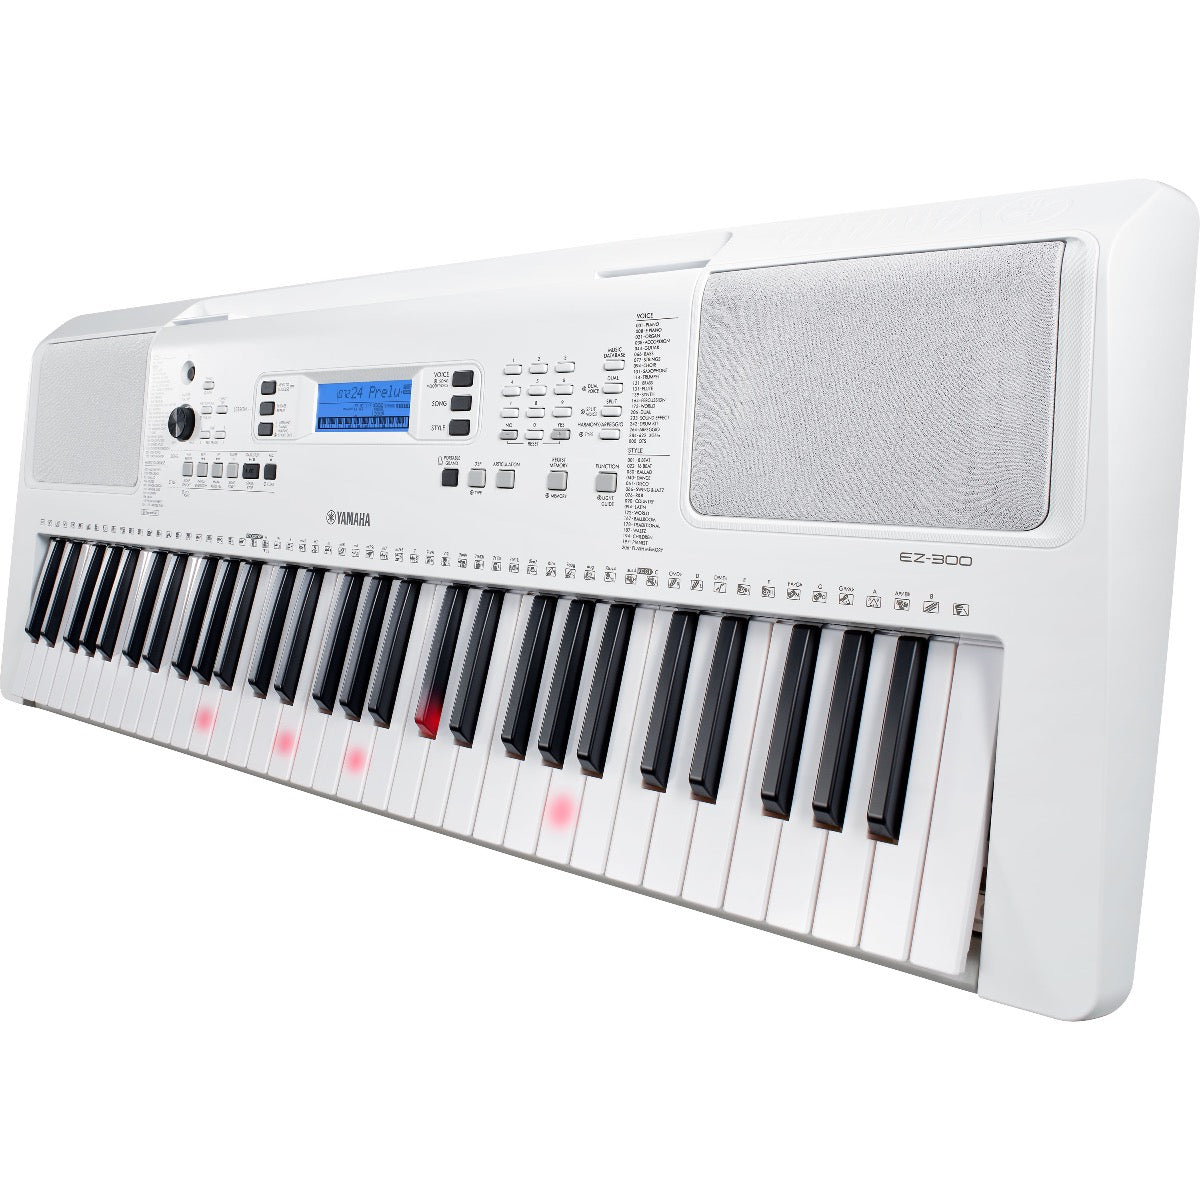 Perspective view of Yamaha EZ-300 Portable Keyboard showing top and right side